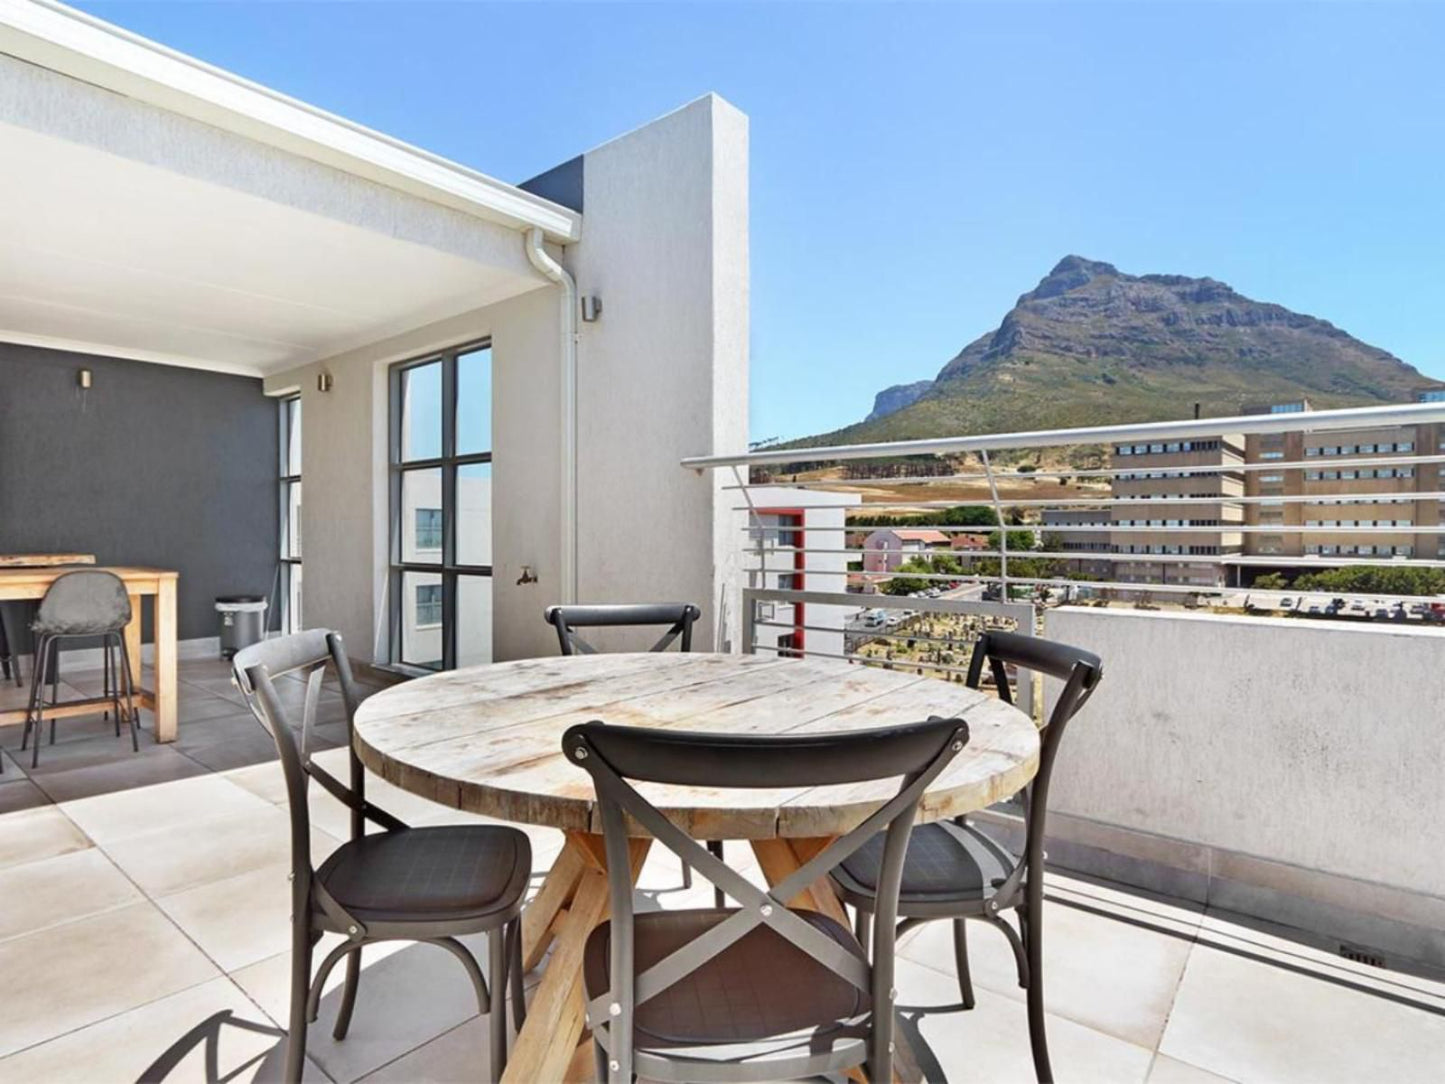 The Paragon 317 By Hostagents Observatory Cape Town Western Cape South Africa Balcony, Architecture